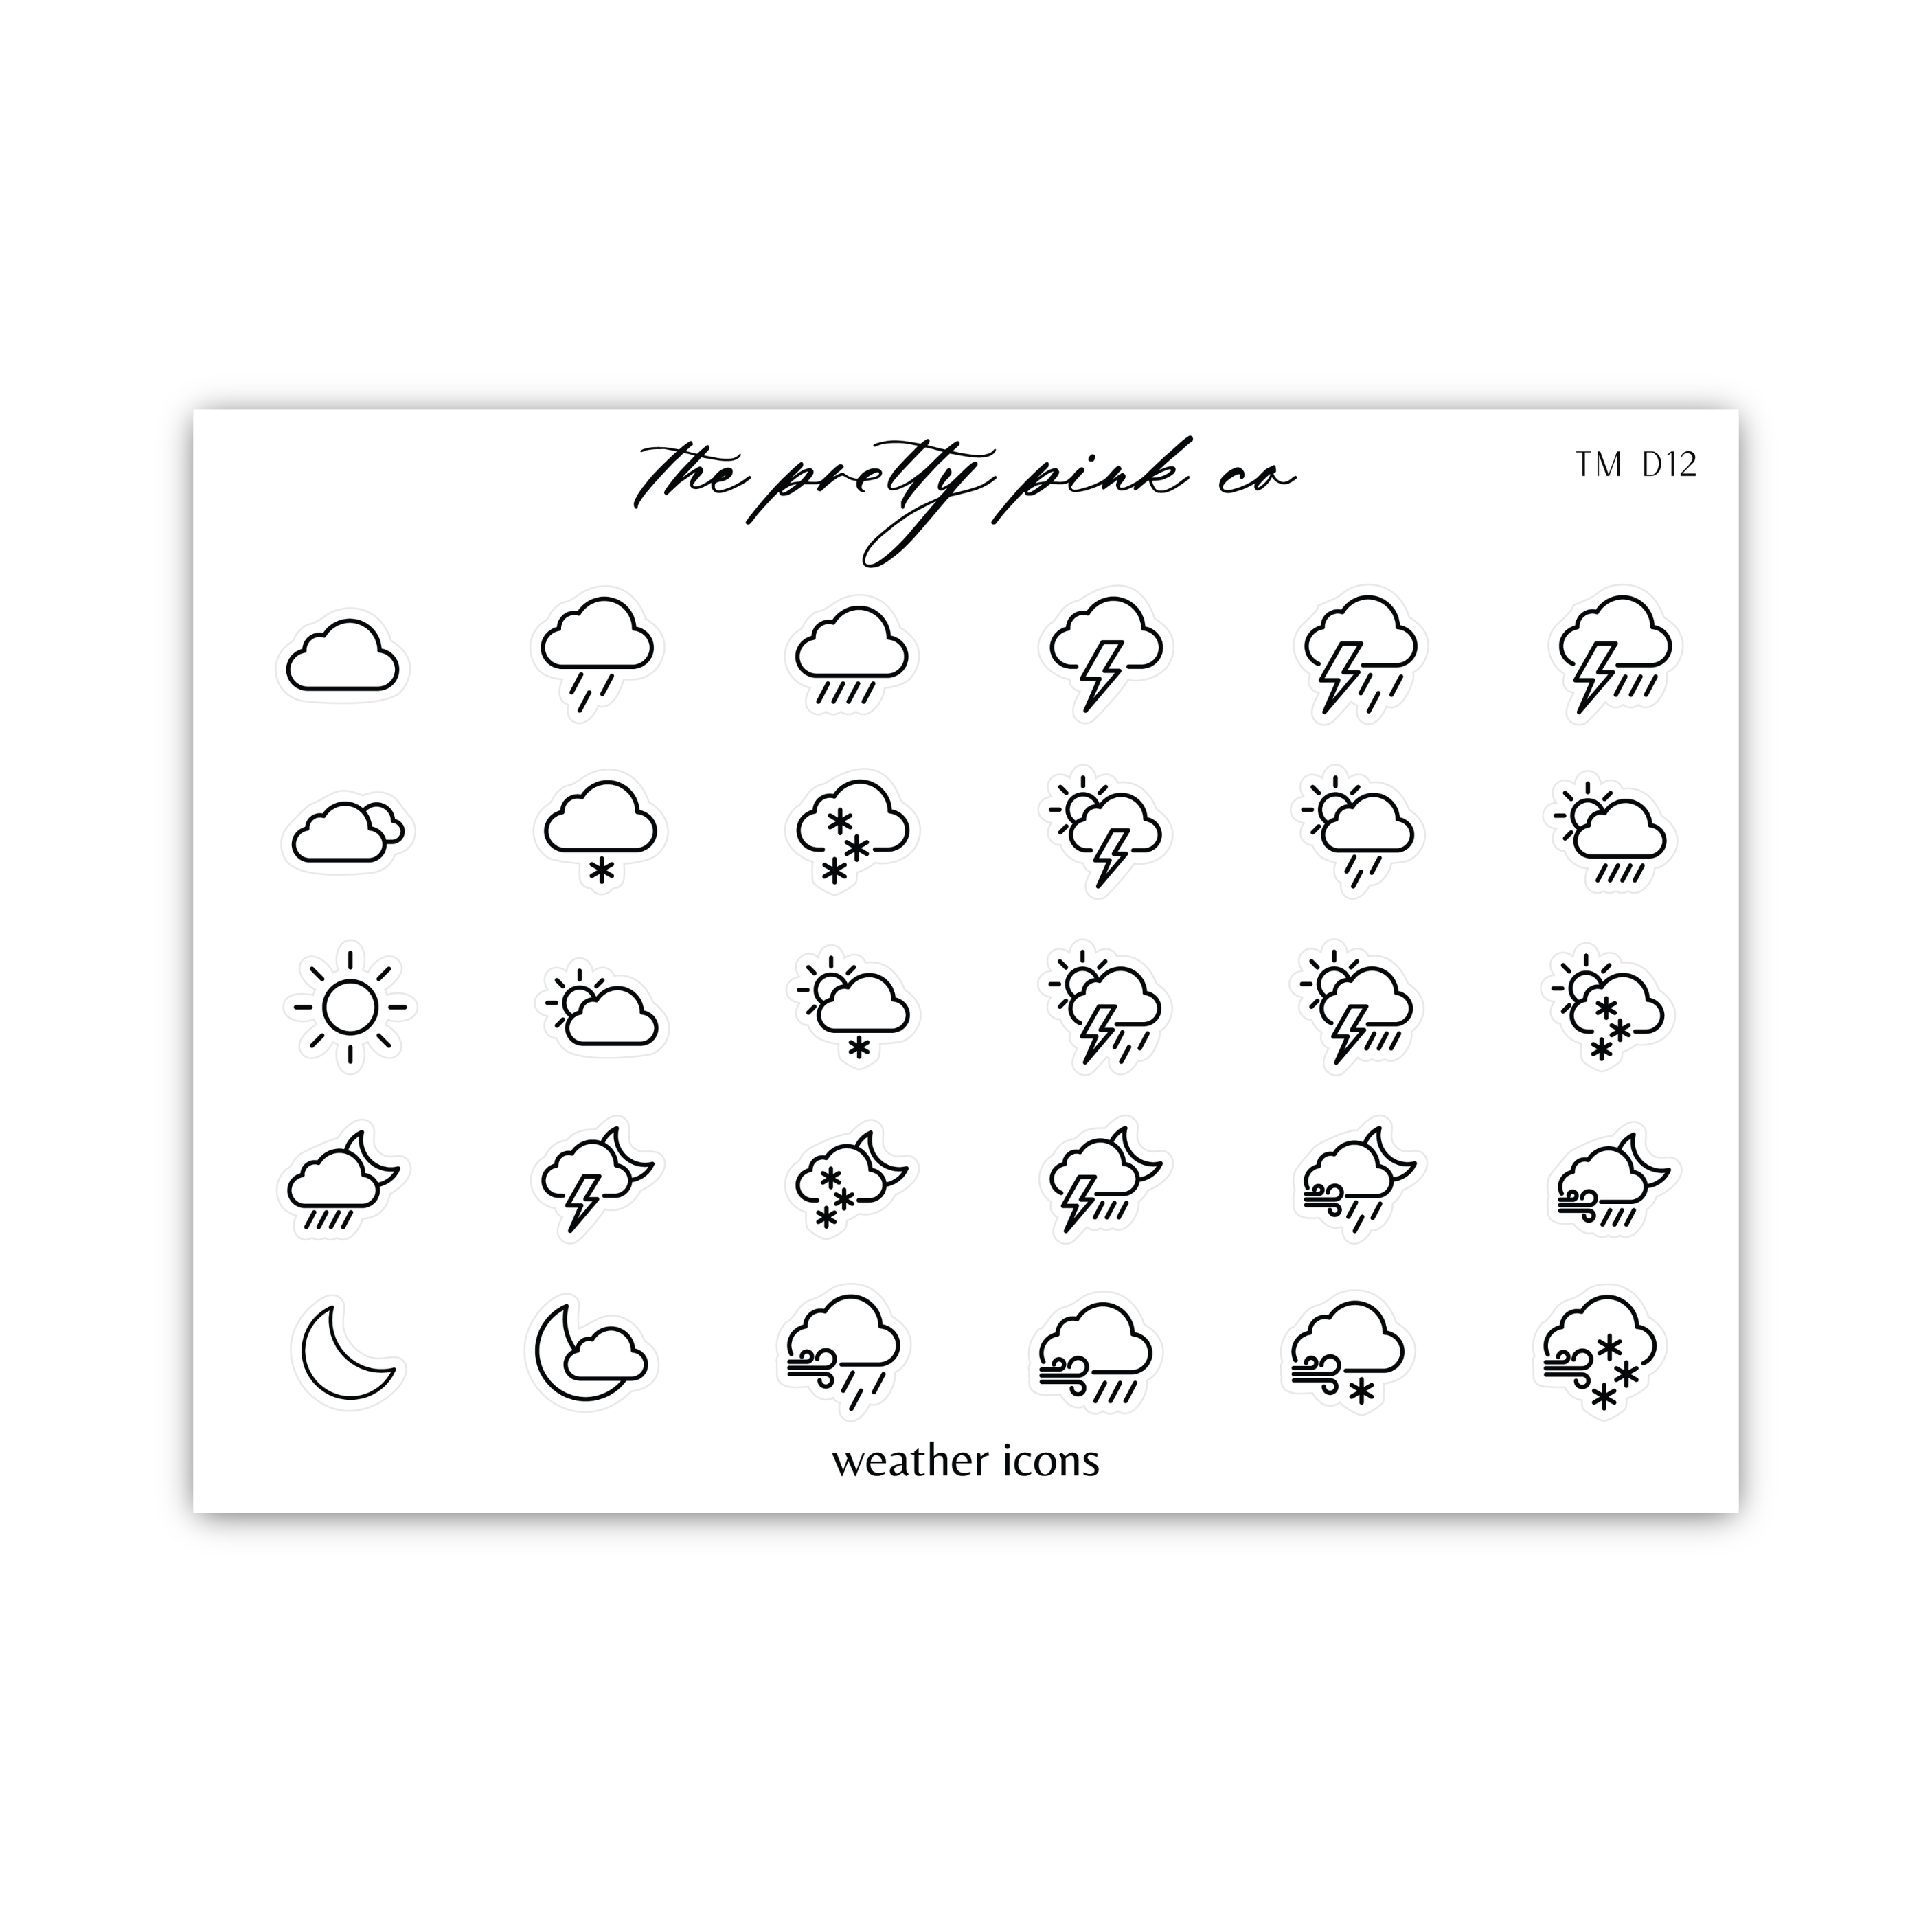 a sticker of weather icons on a white background